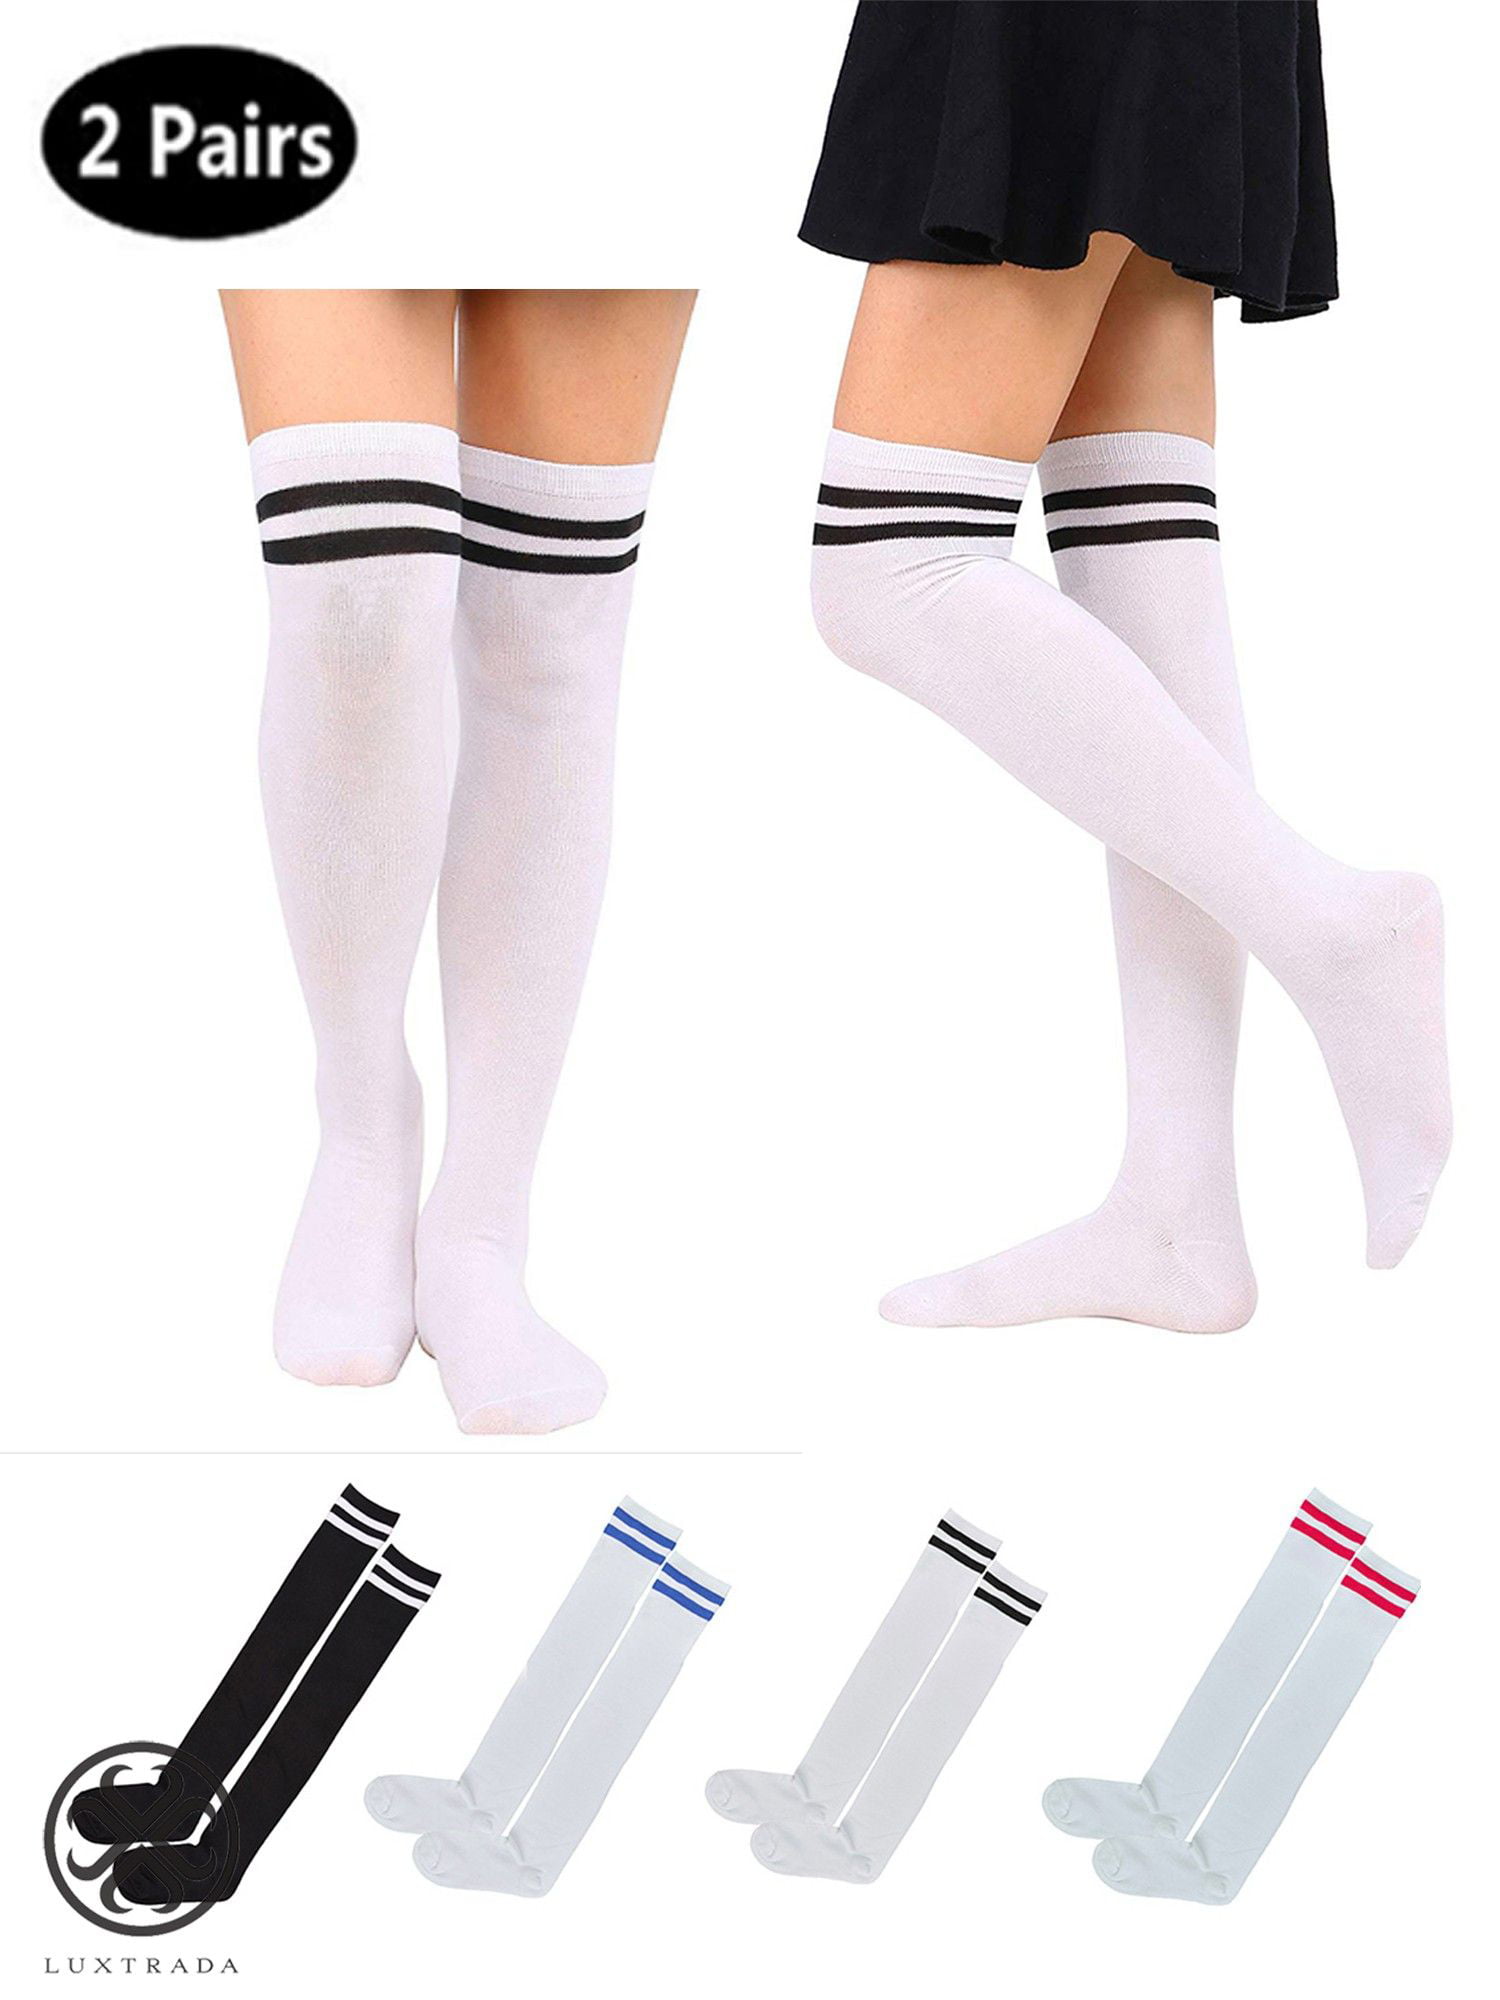 Women Girls Warm Knit Over Knee Thigh High Stockings Knitted Tights Long Socks